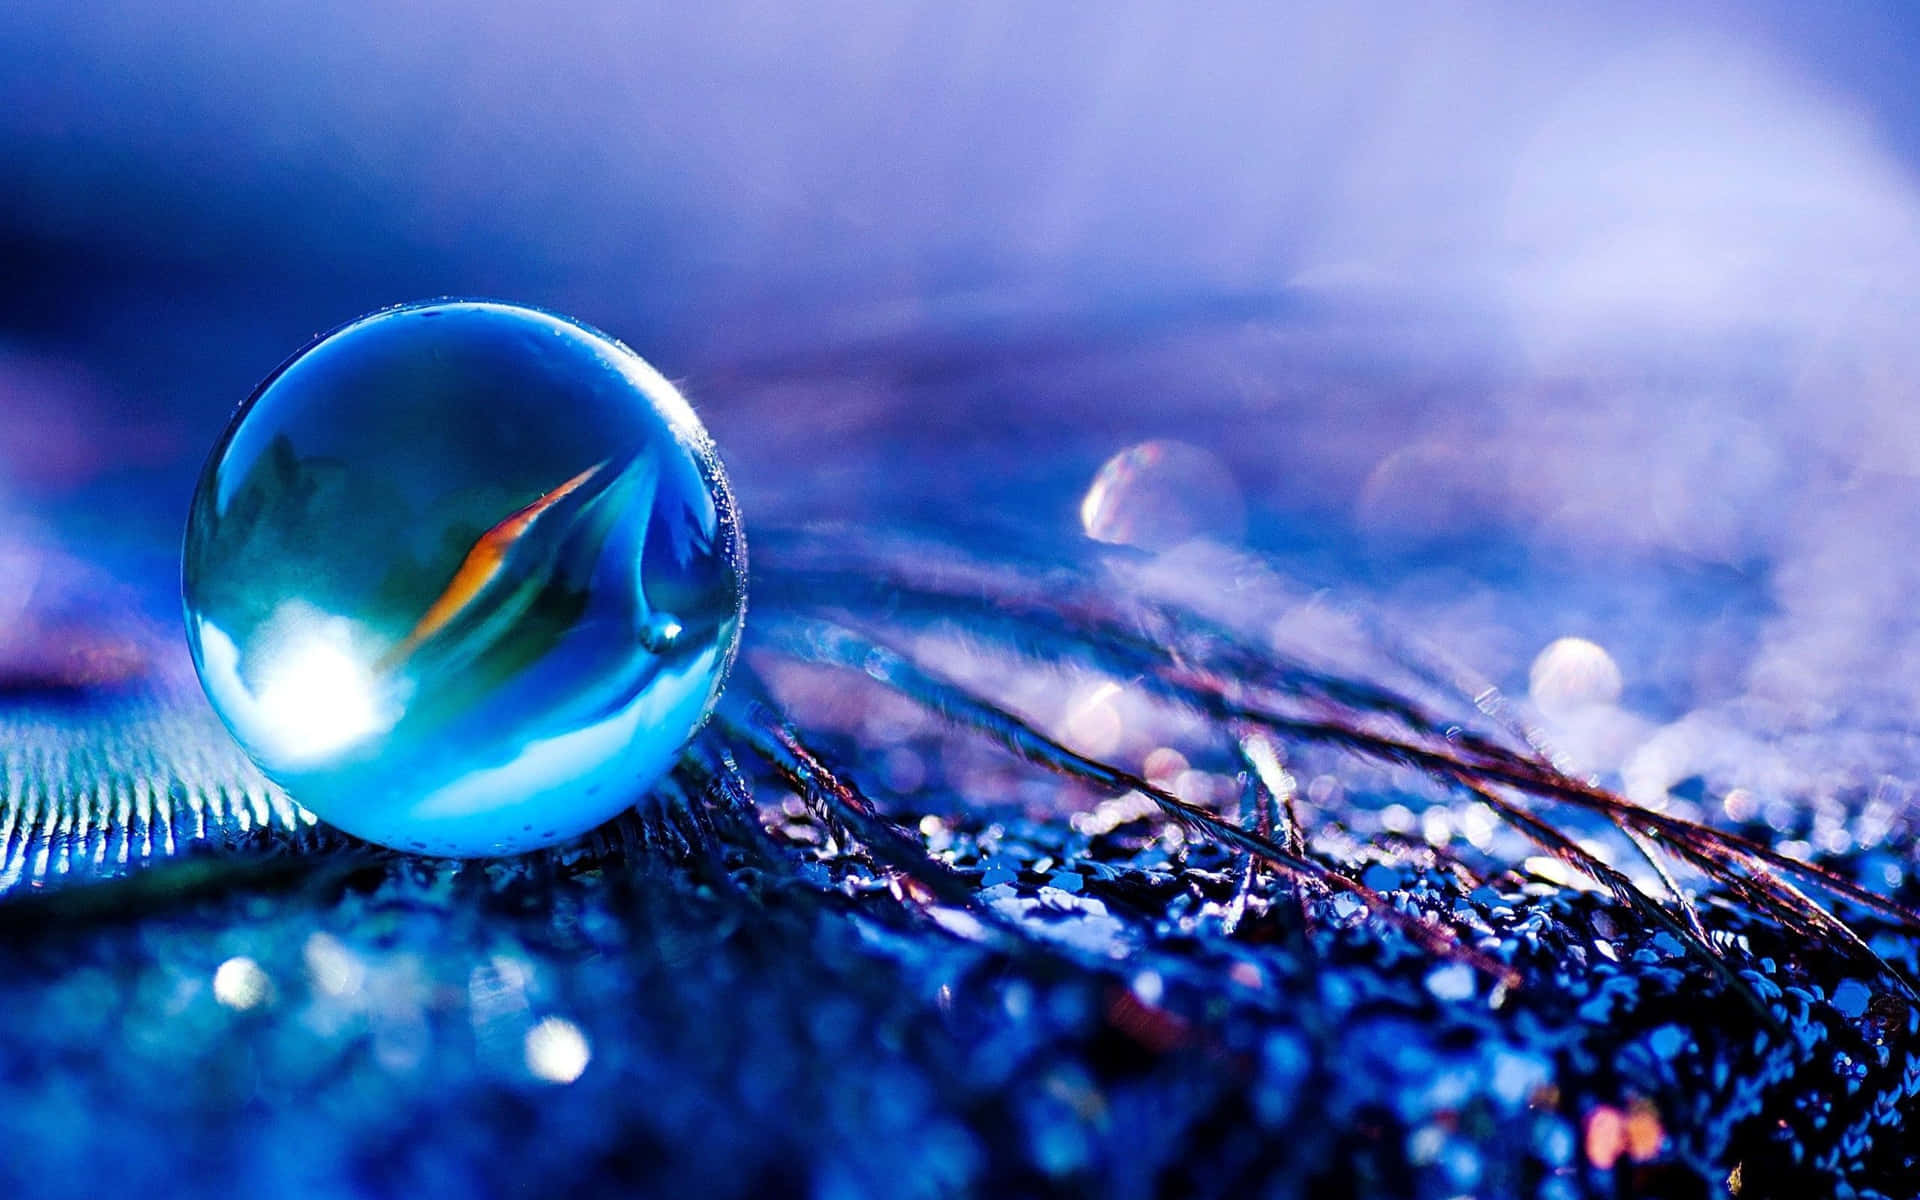 Mystical Crystal Ball on a Wooden Table Wallpaper